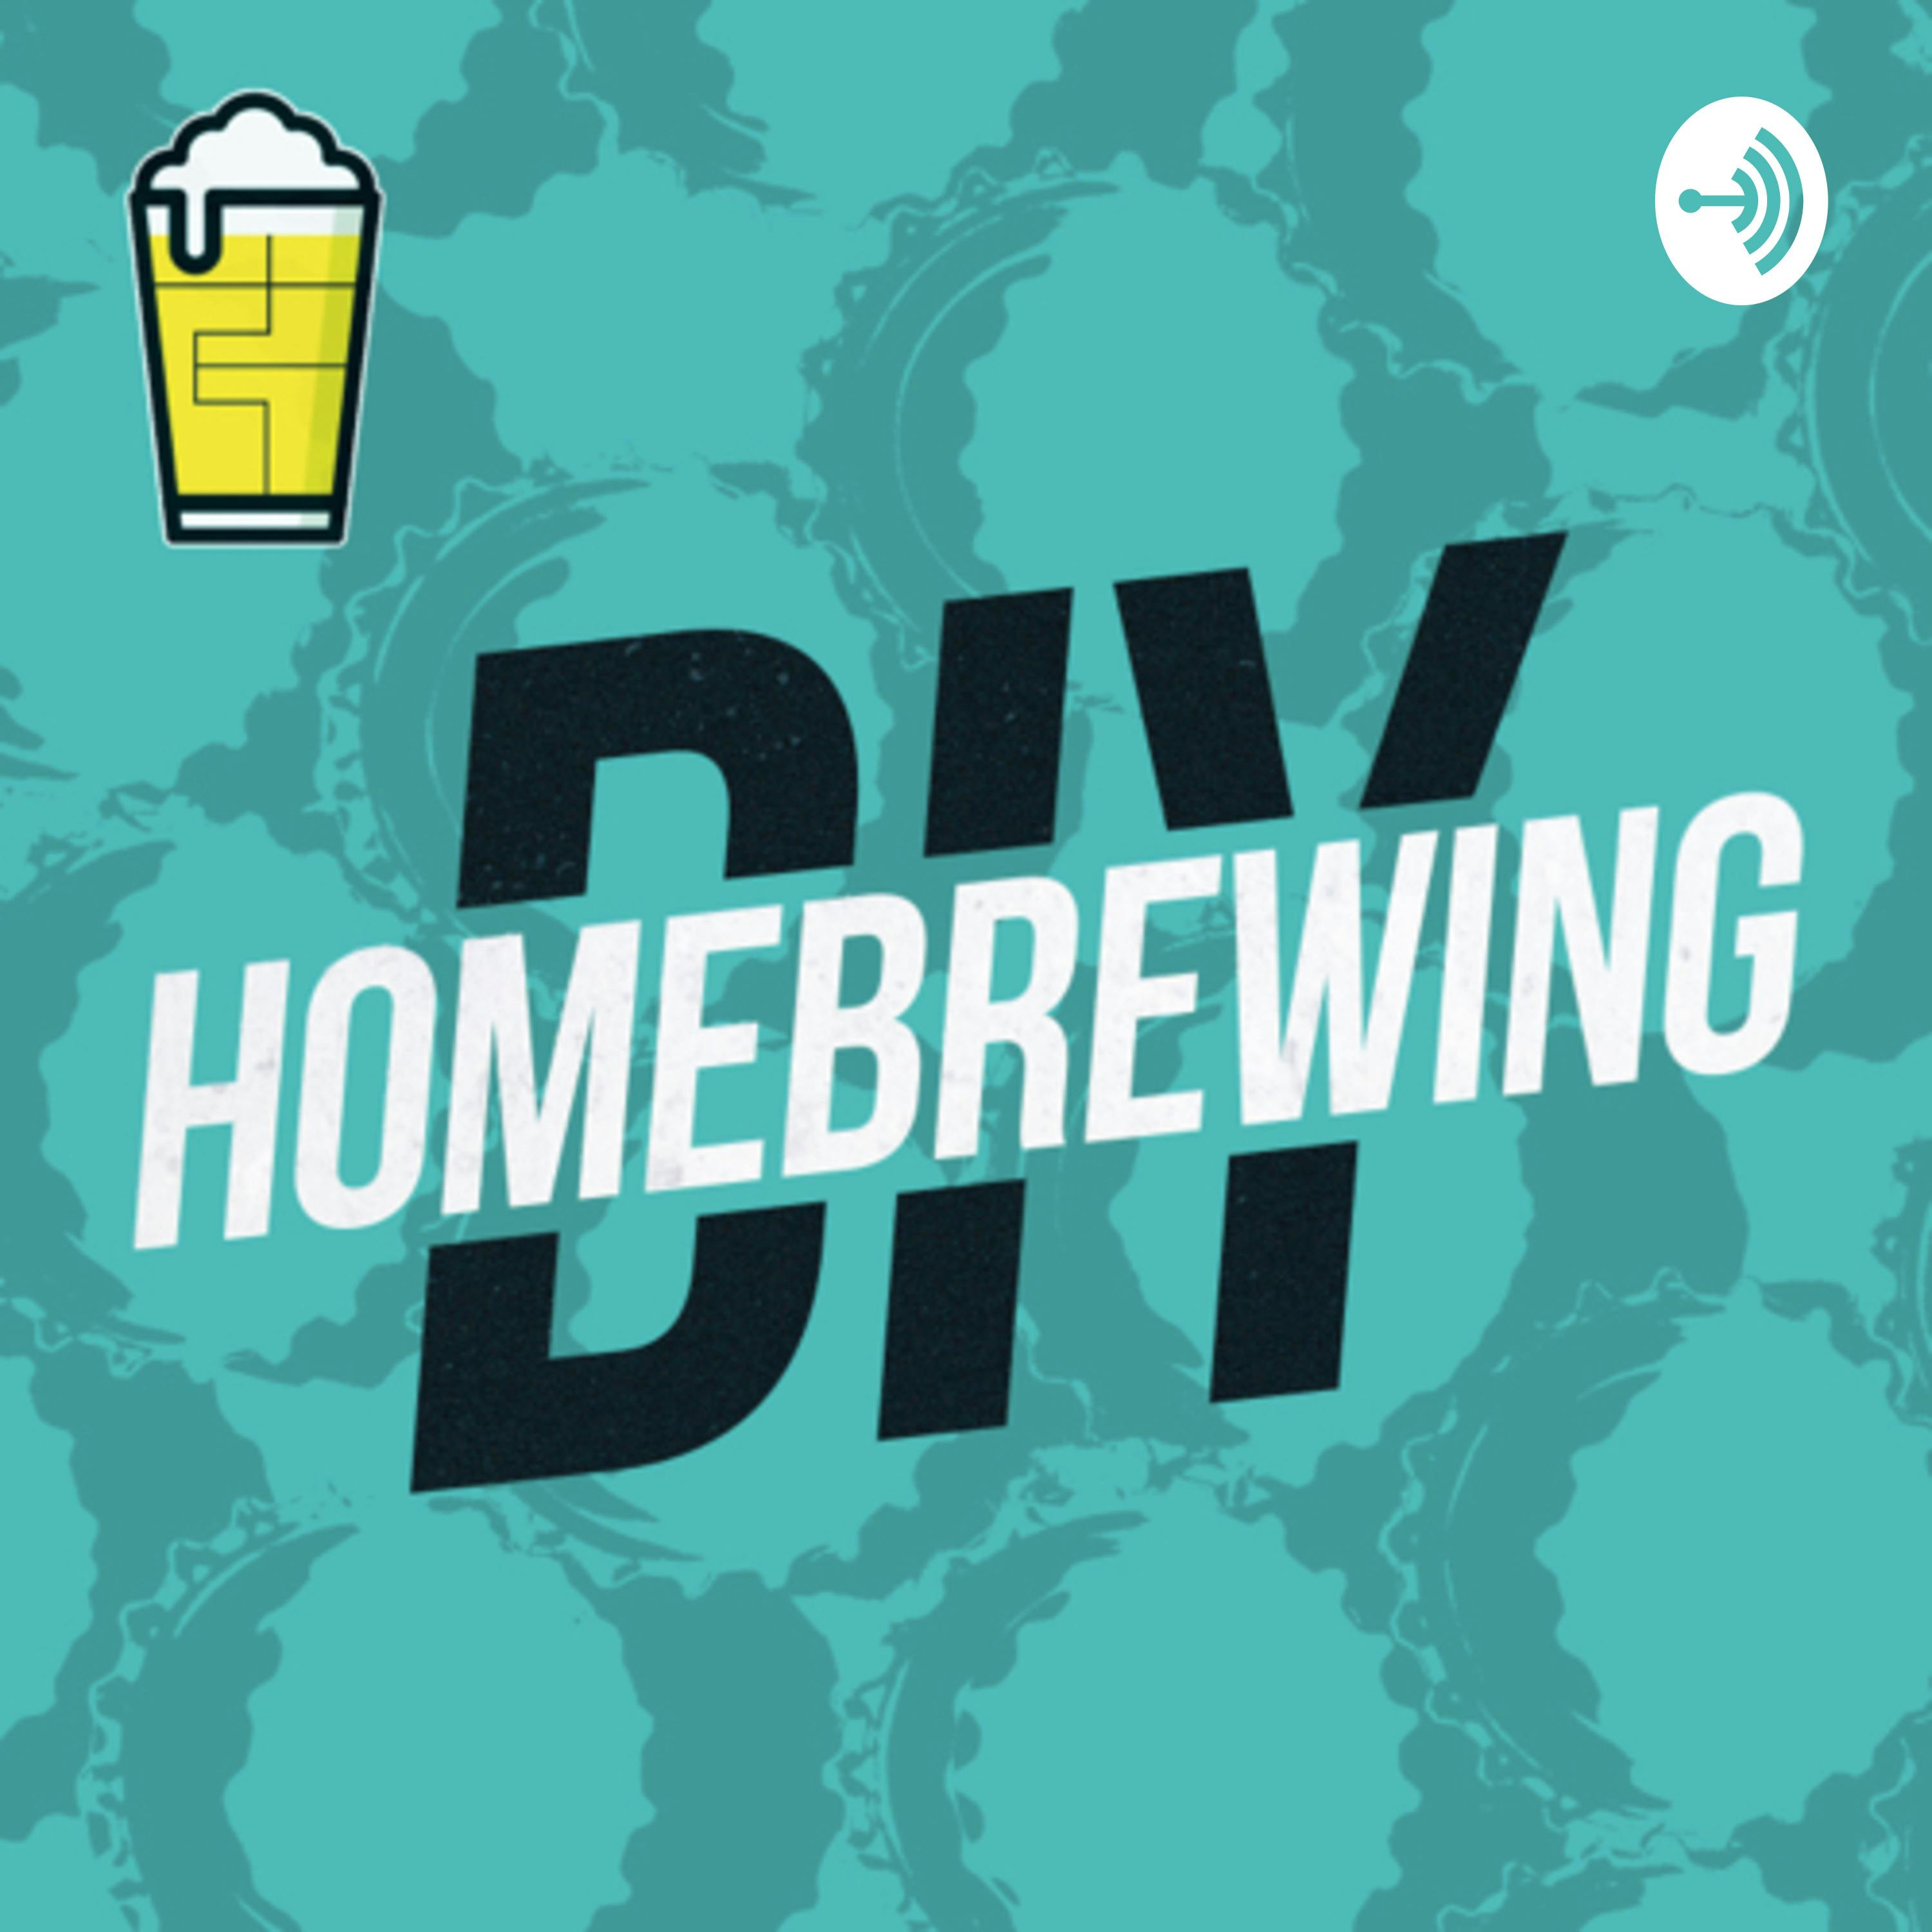 Open Source Homebrewing